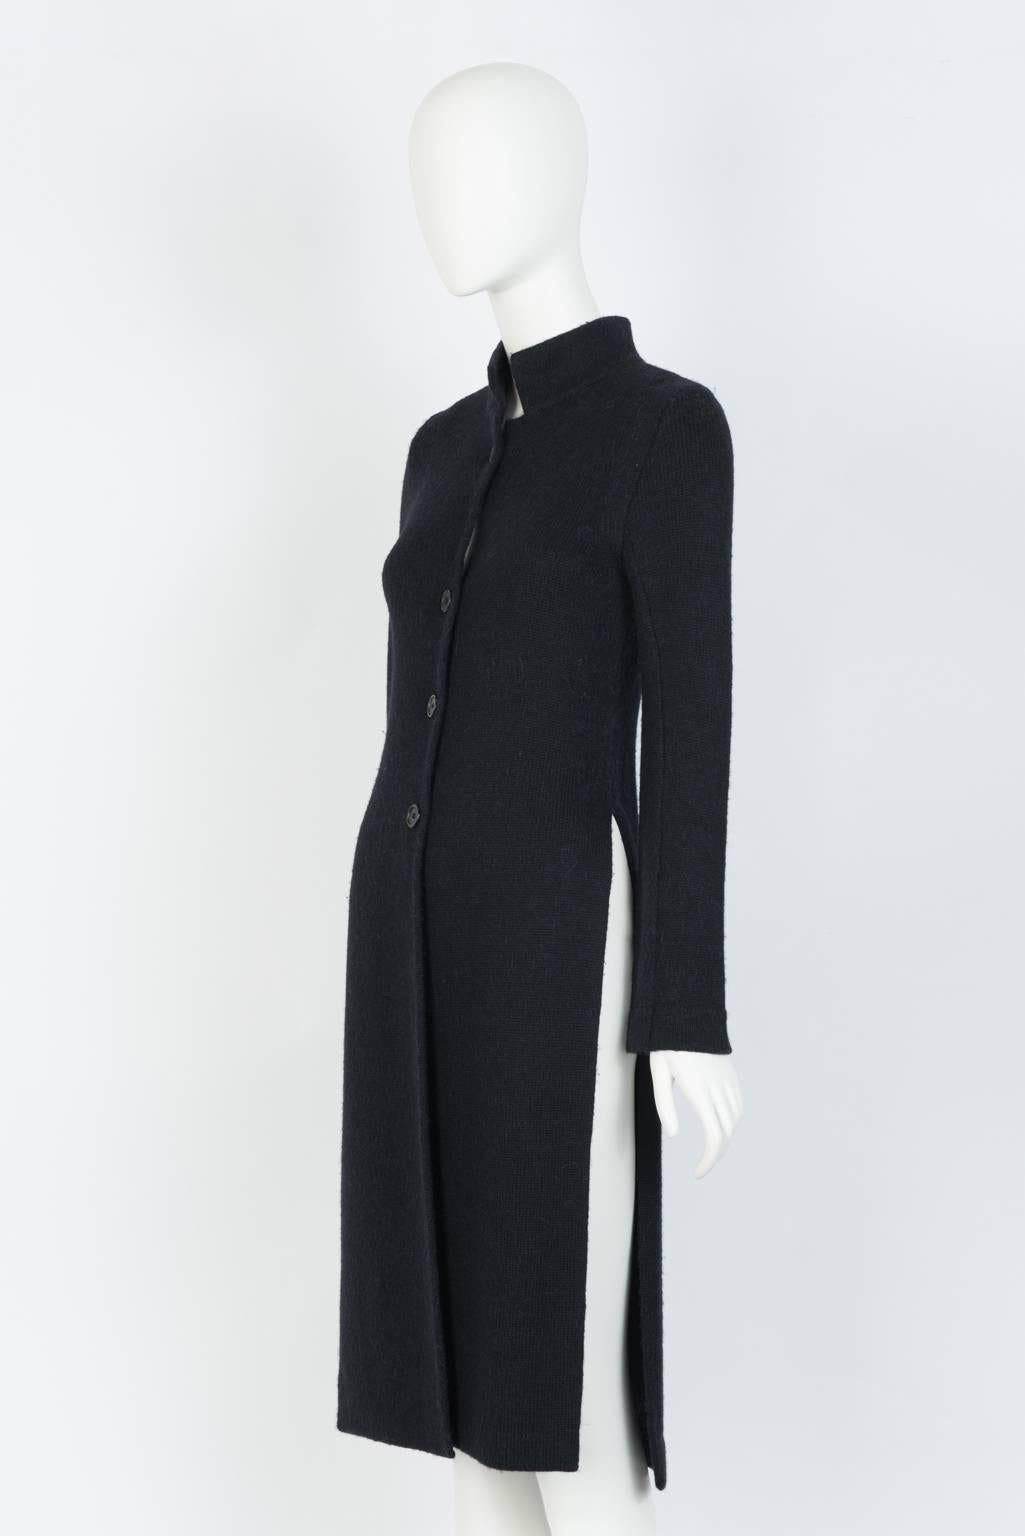 Tunic-style, four button knit black coat with high side slits and Mardarin collar.